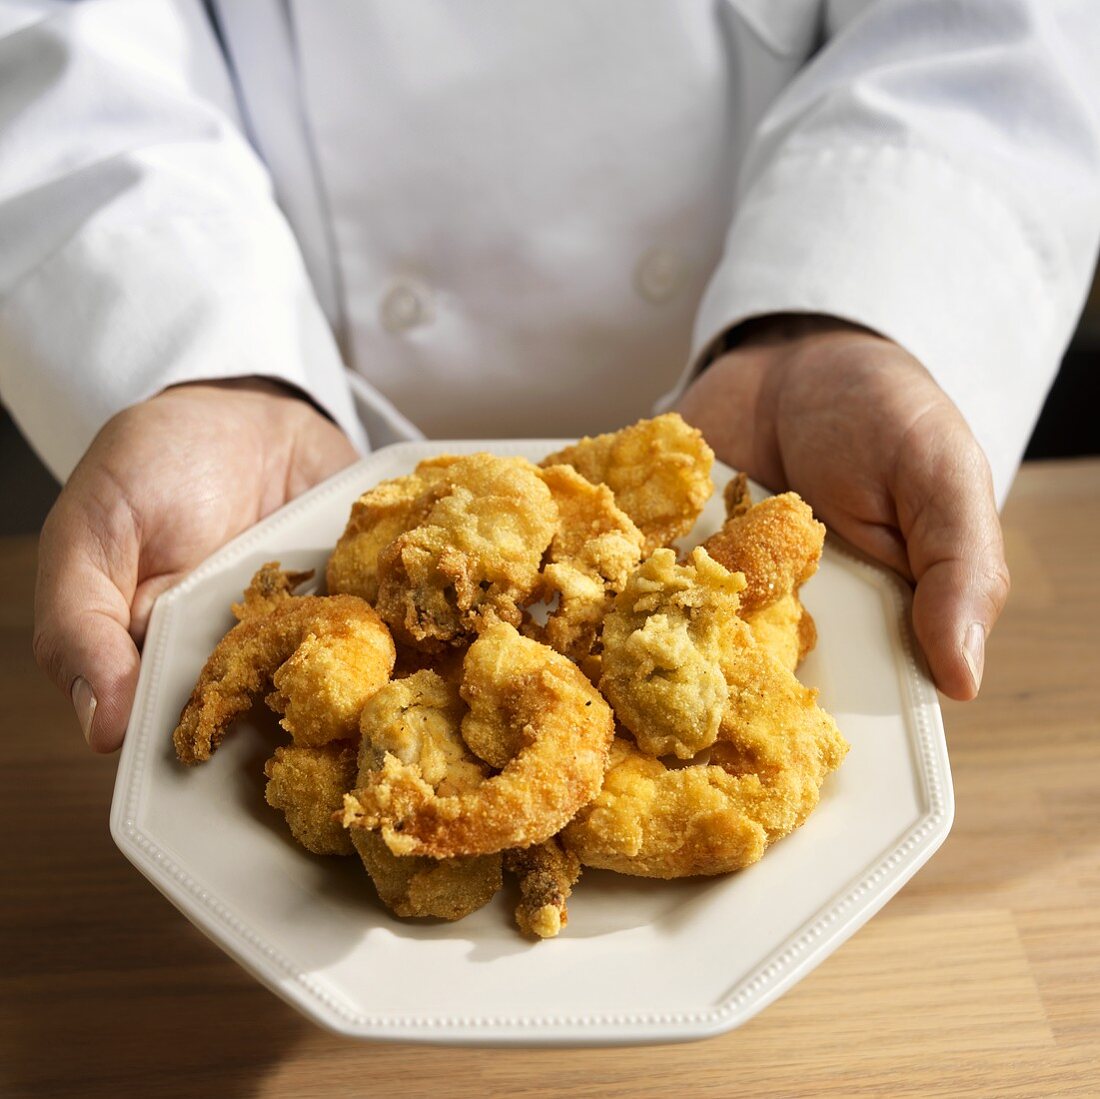 Chef Holding Plate of Fried Shrimp and Oysters; Cornmeal Breaded